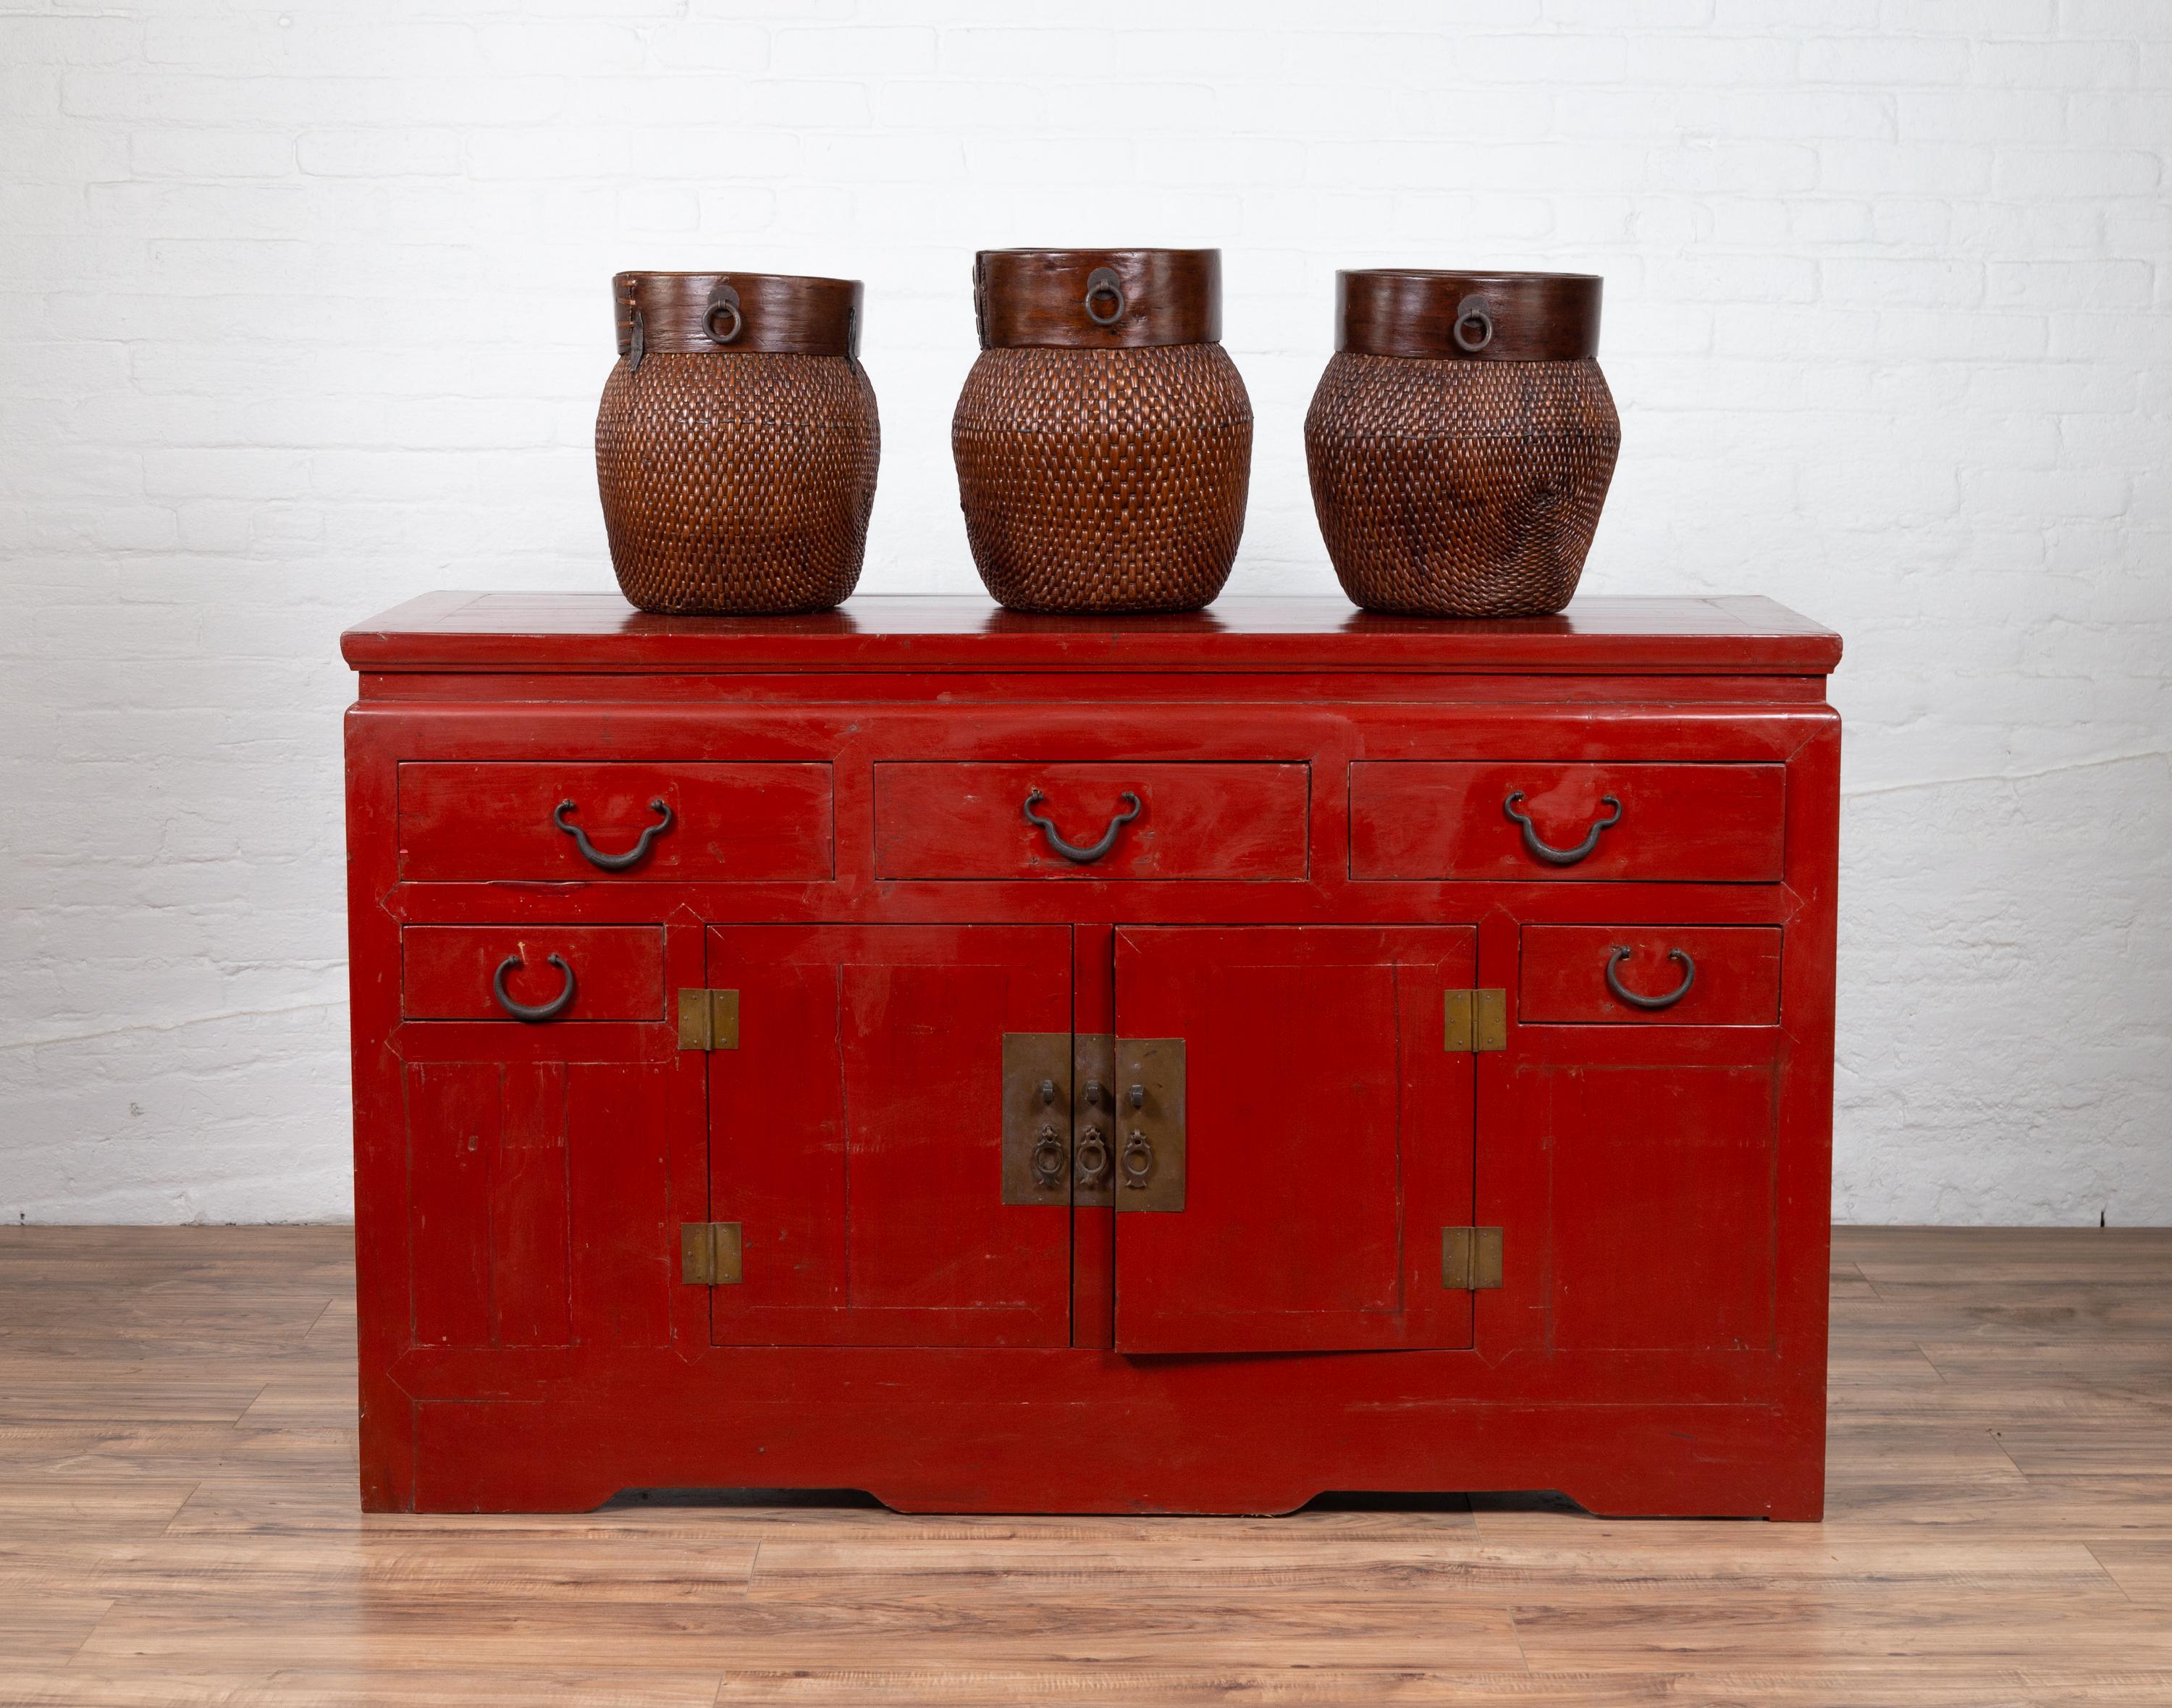 An antique Chinese Ming Dynasty style red lacquered console cabinet from the early 20th century, with five drawers and double doors. Born in China during the early years of the 20th century, this console cabinet captures our attention with its red